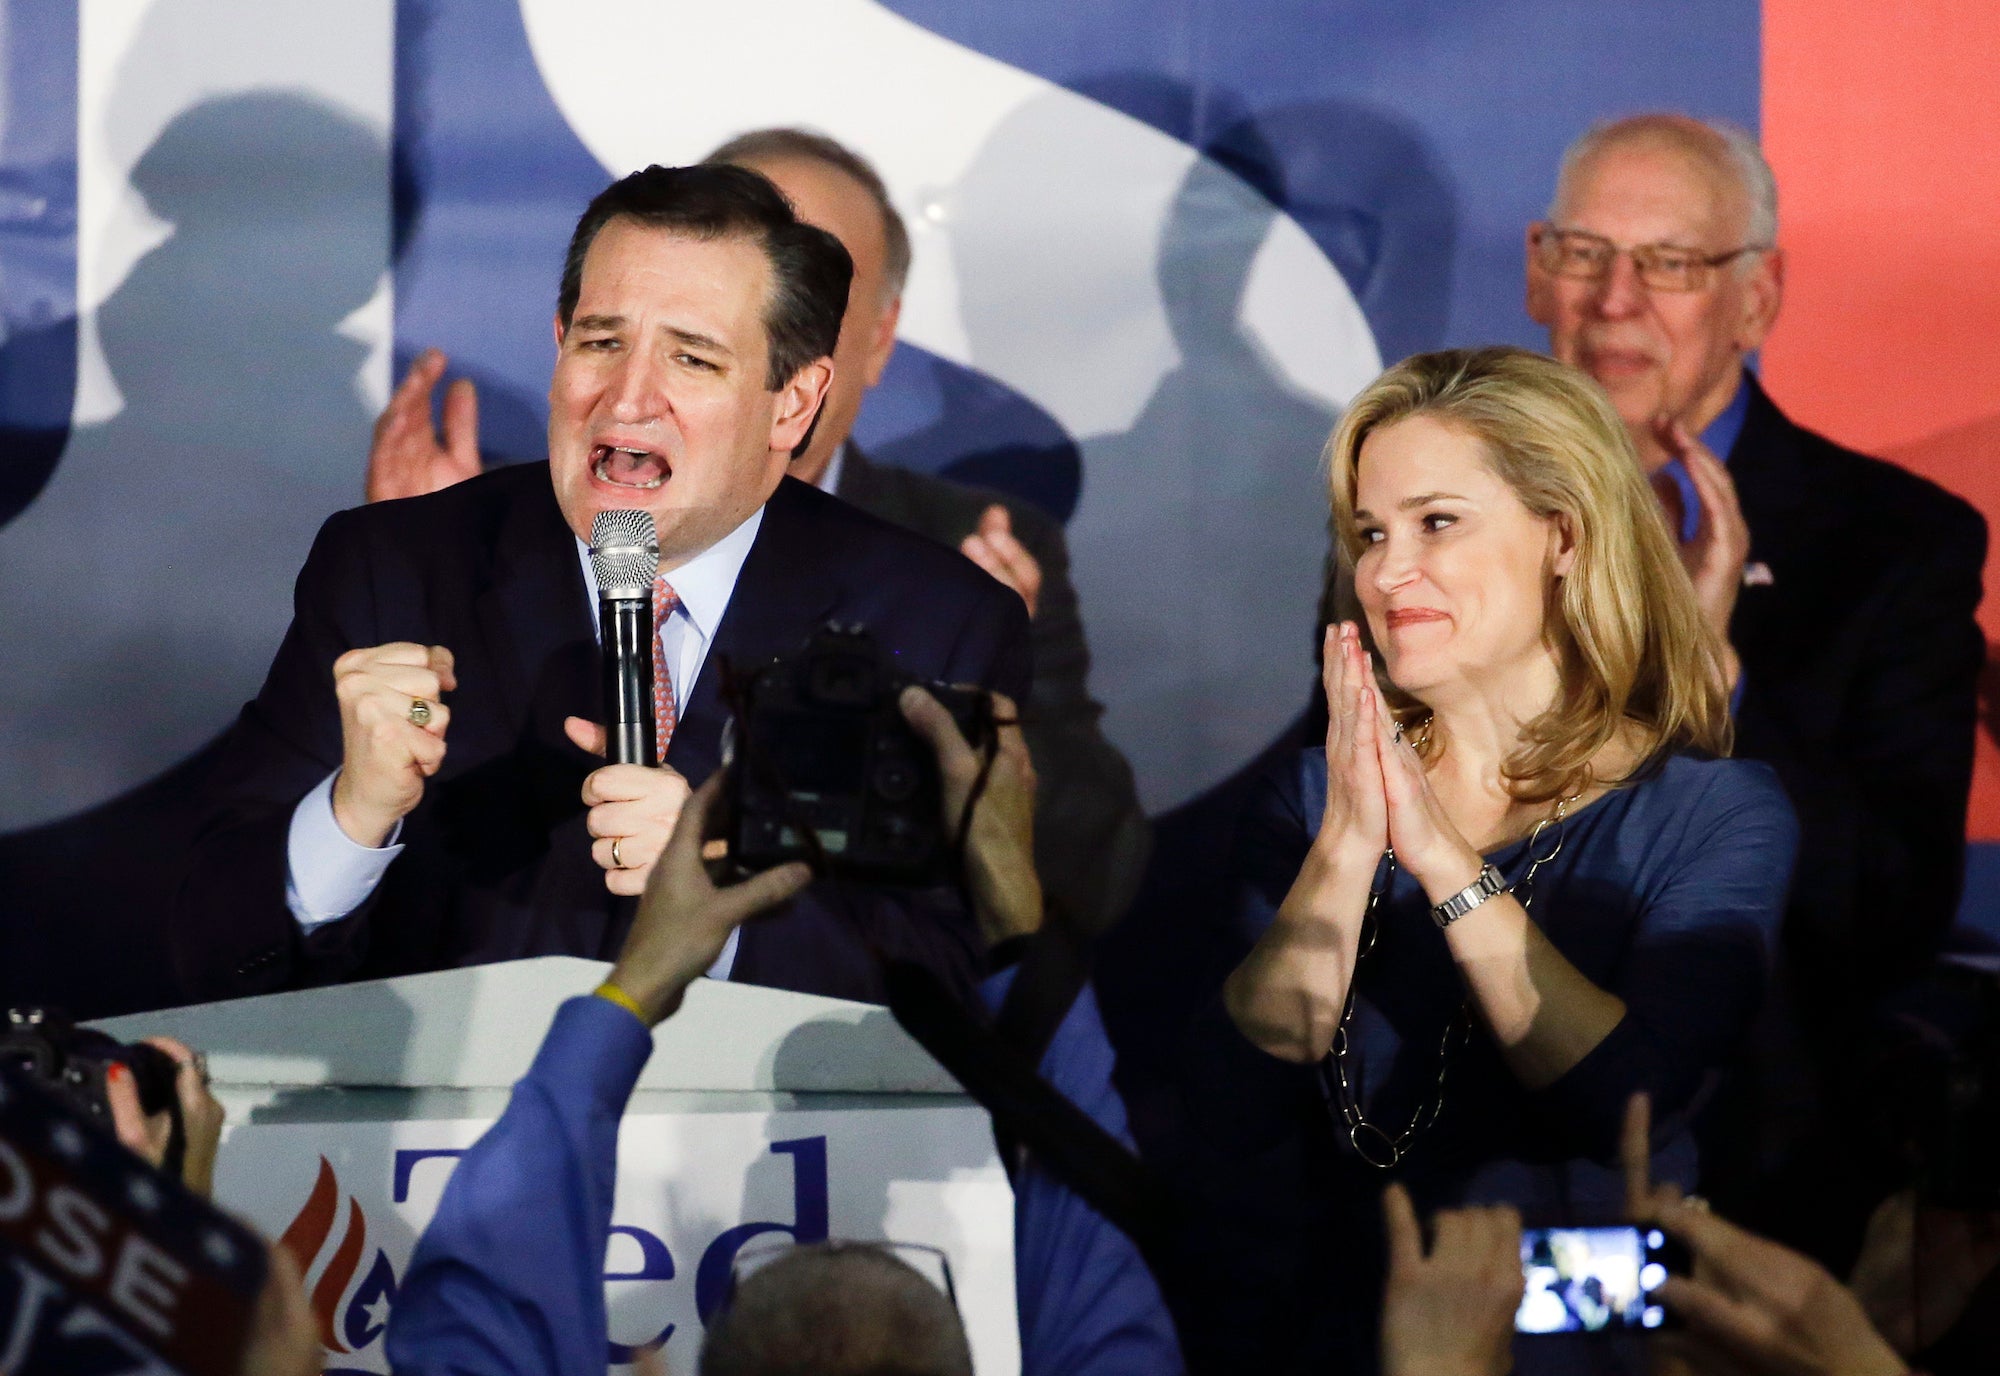 Ted Cruz speaks during a caucus rally with his wife Heidi in Des Moines, Iowa.